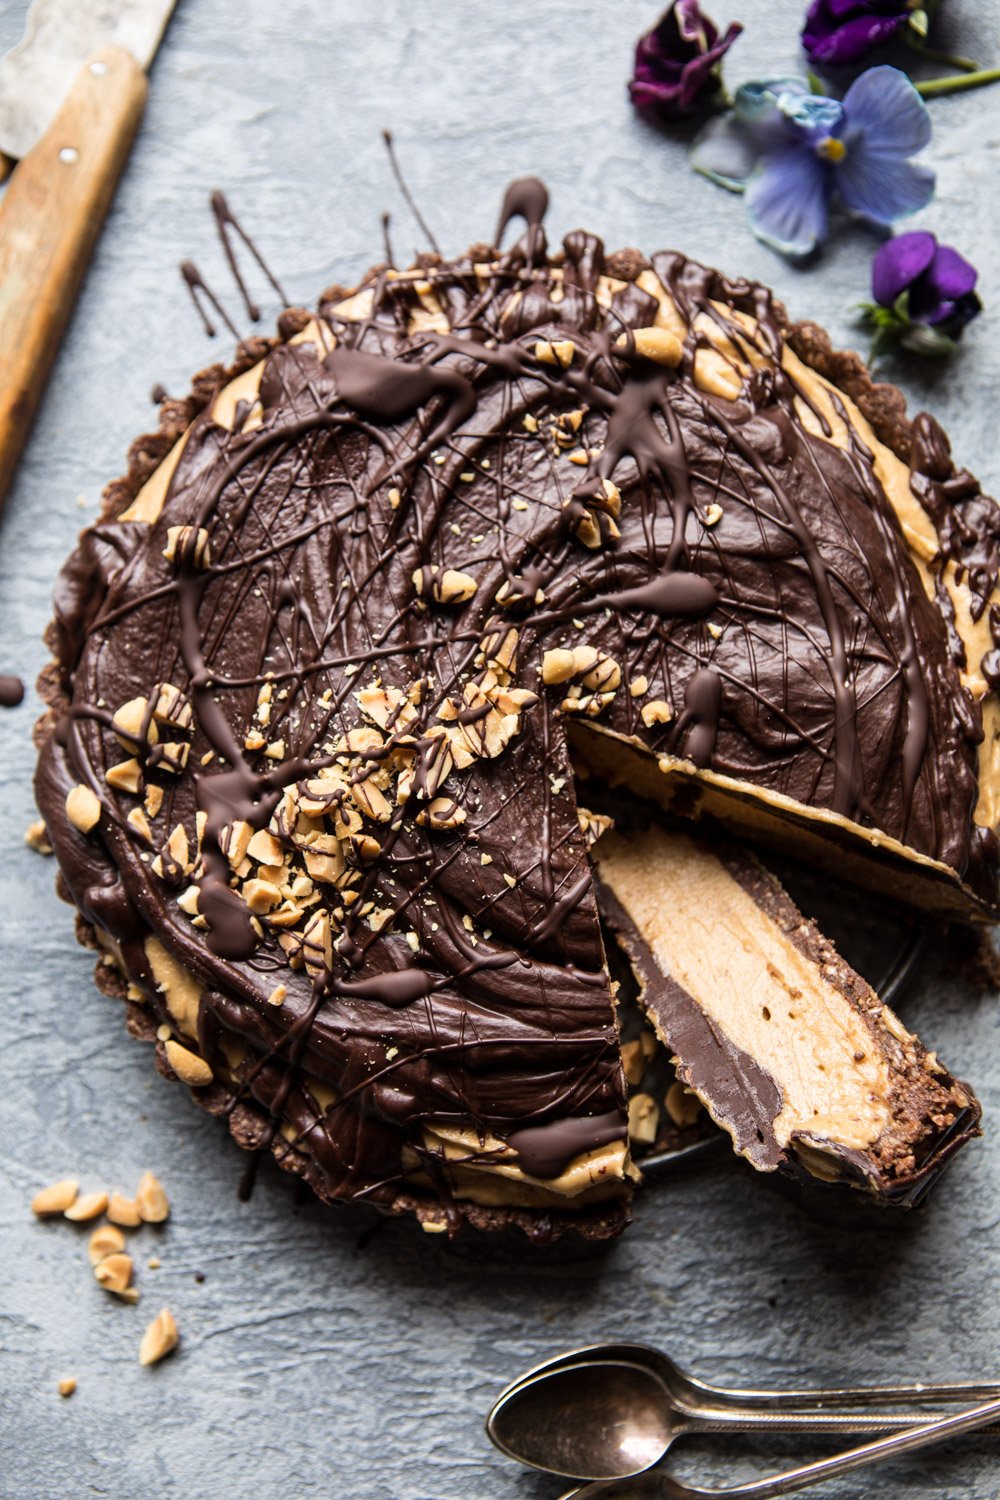 frozen peanut butter cup pie + 50 recipes for perfect for summer parties! | summer food, summer parties, summer recipes, summer appetizers, summer desserts, summer drinks, easy entertaining, entertaining tips |